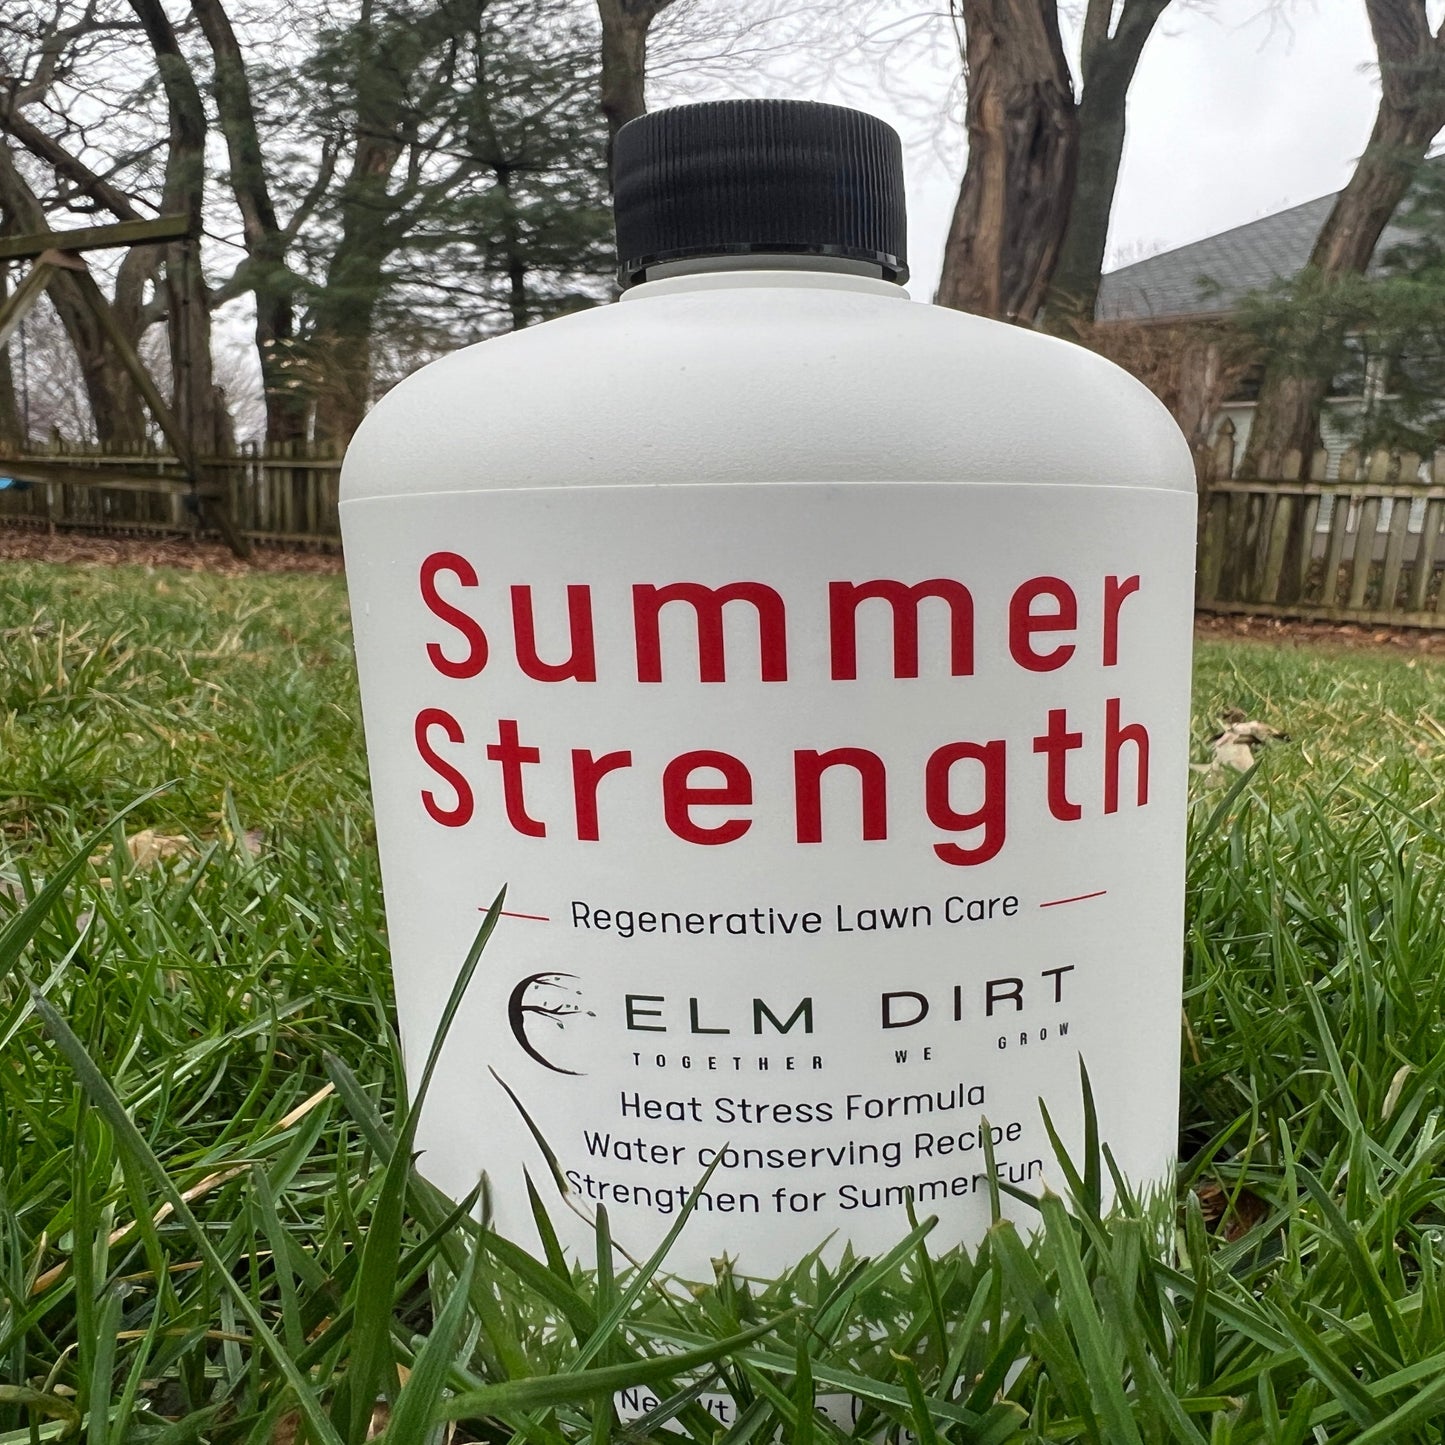 Regenerative and Sustainable Lawn Care by Elm Dirt - Lotus and Willow